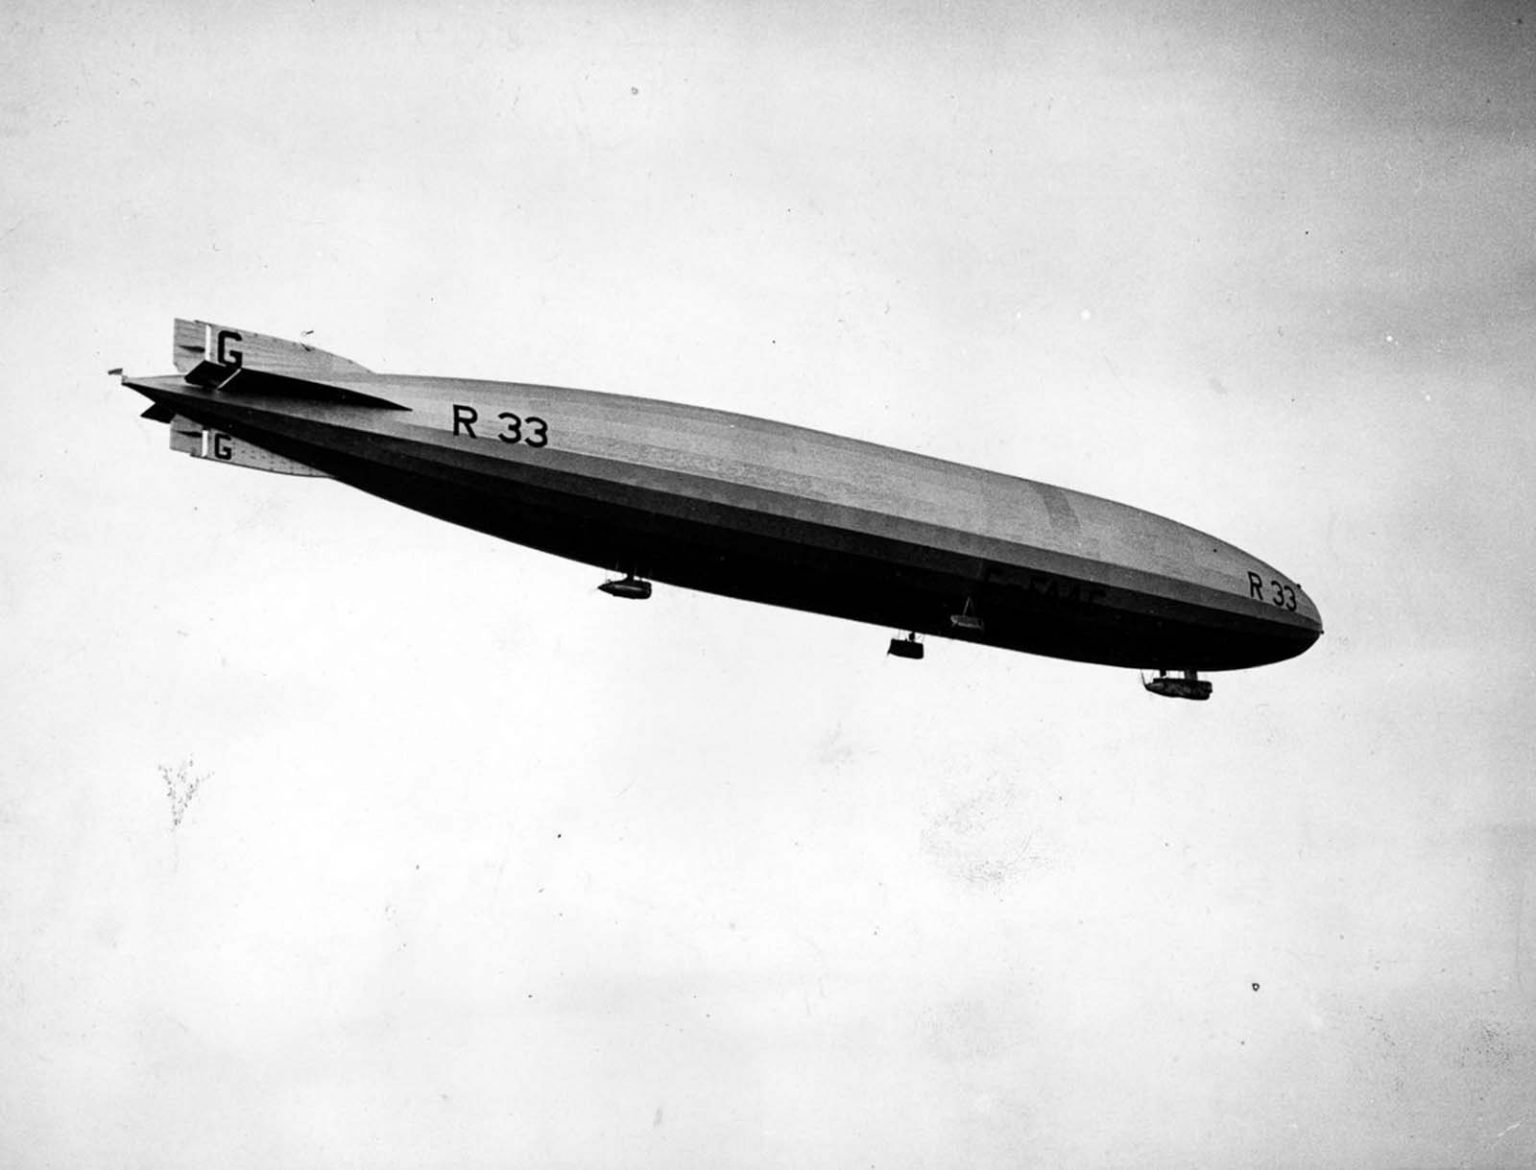 The Dirigibles That Once Roamed The Skies- in pictures - Museum Facts